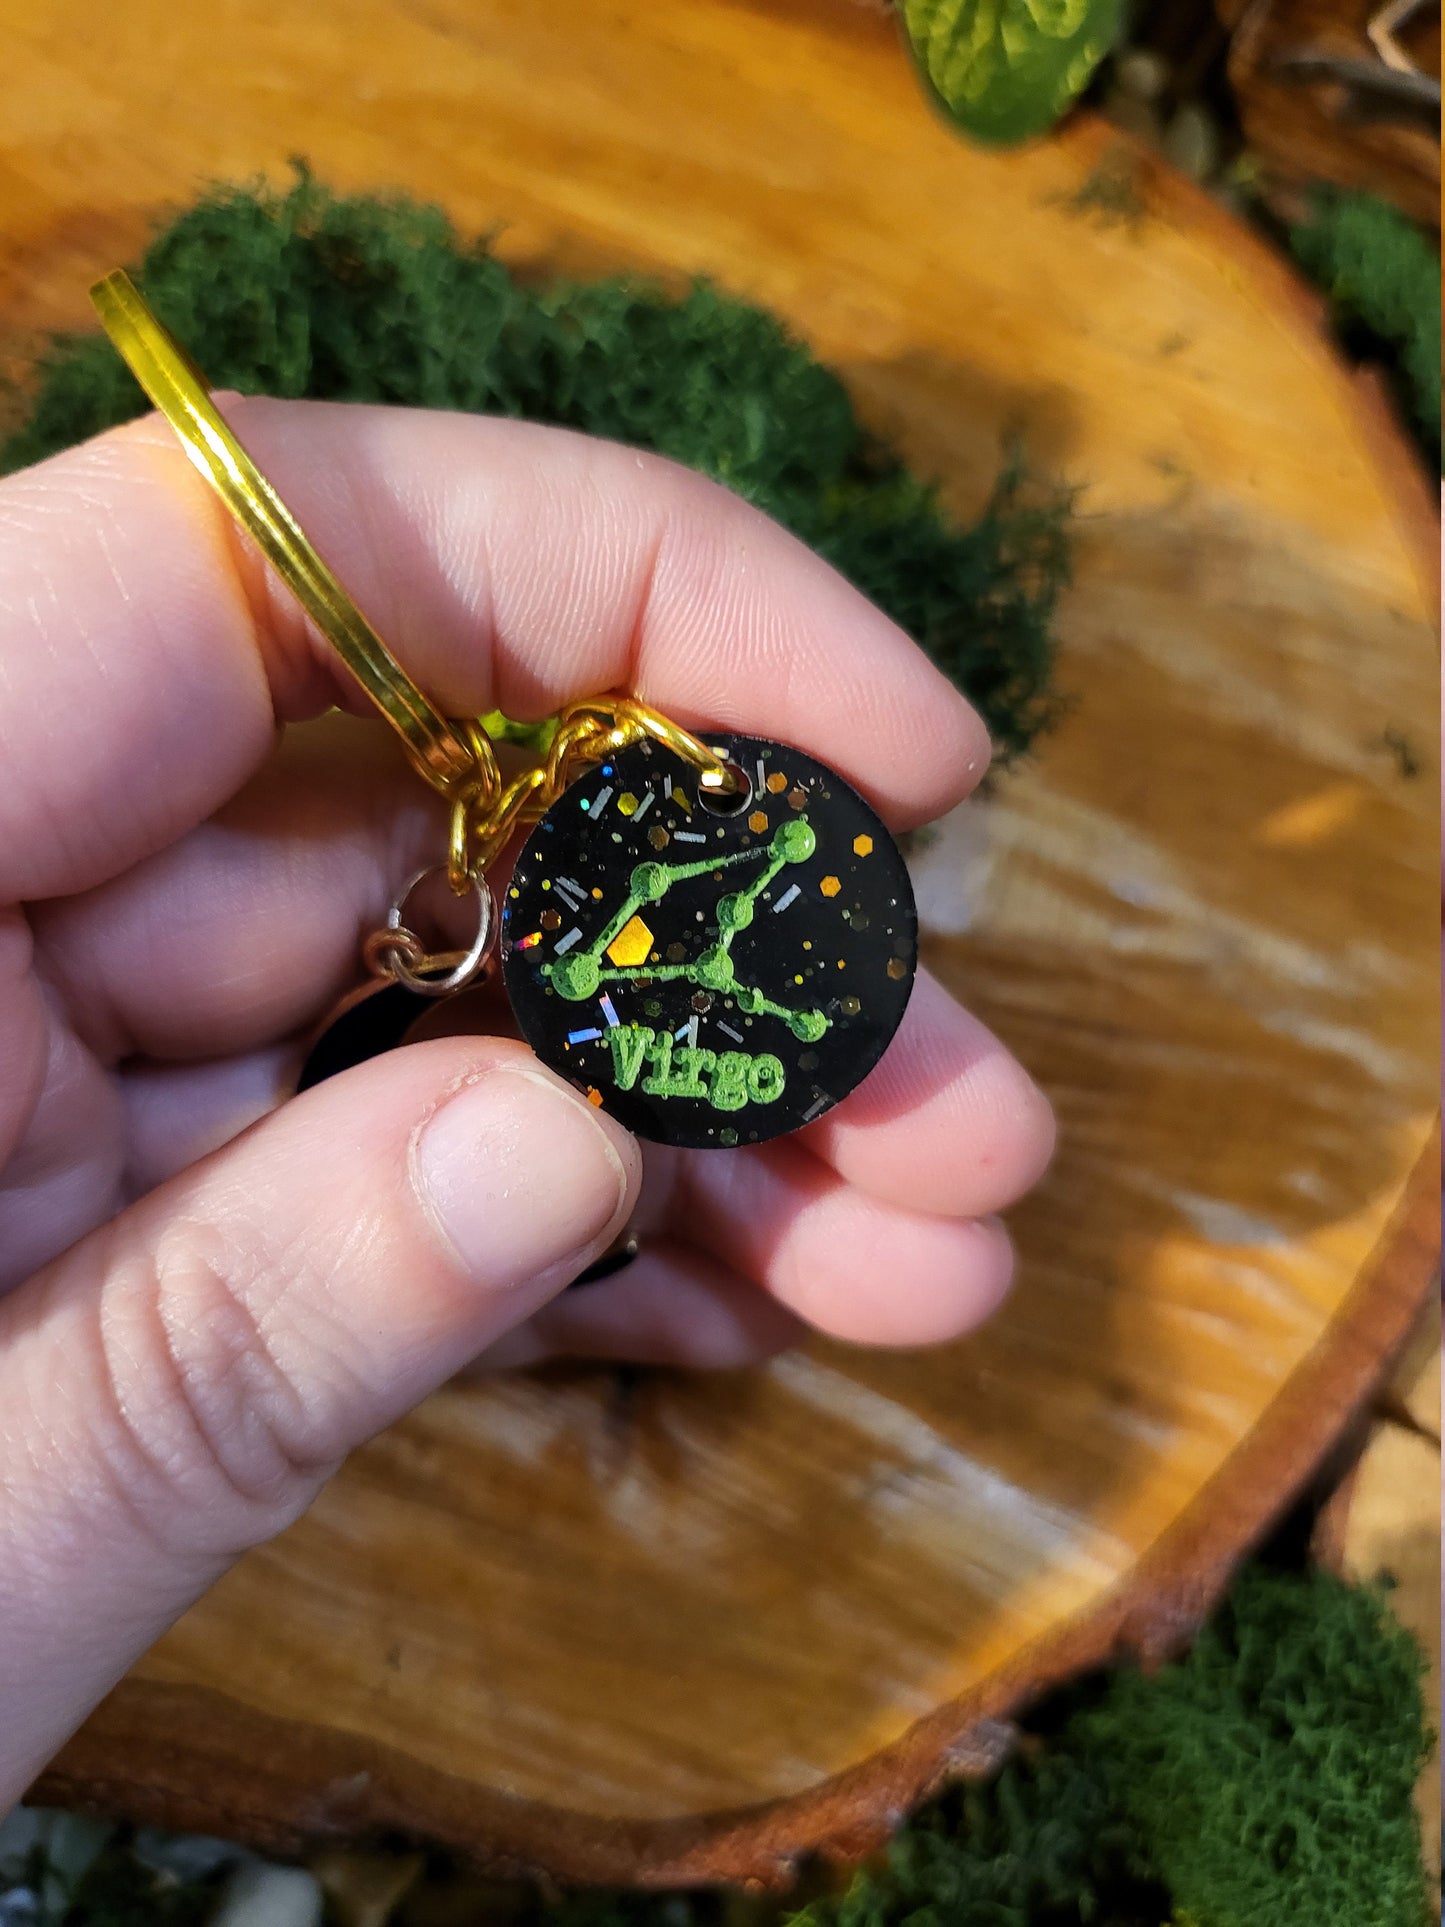 Black Glitter Filled with Green Design Astrological Keychains with Charms